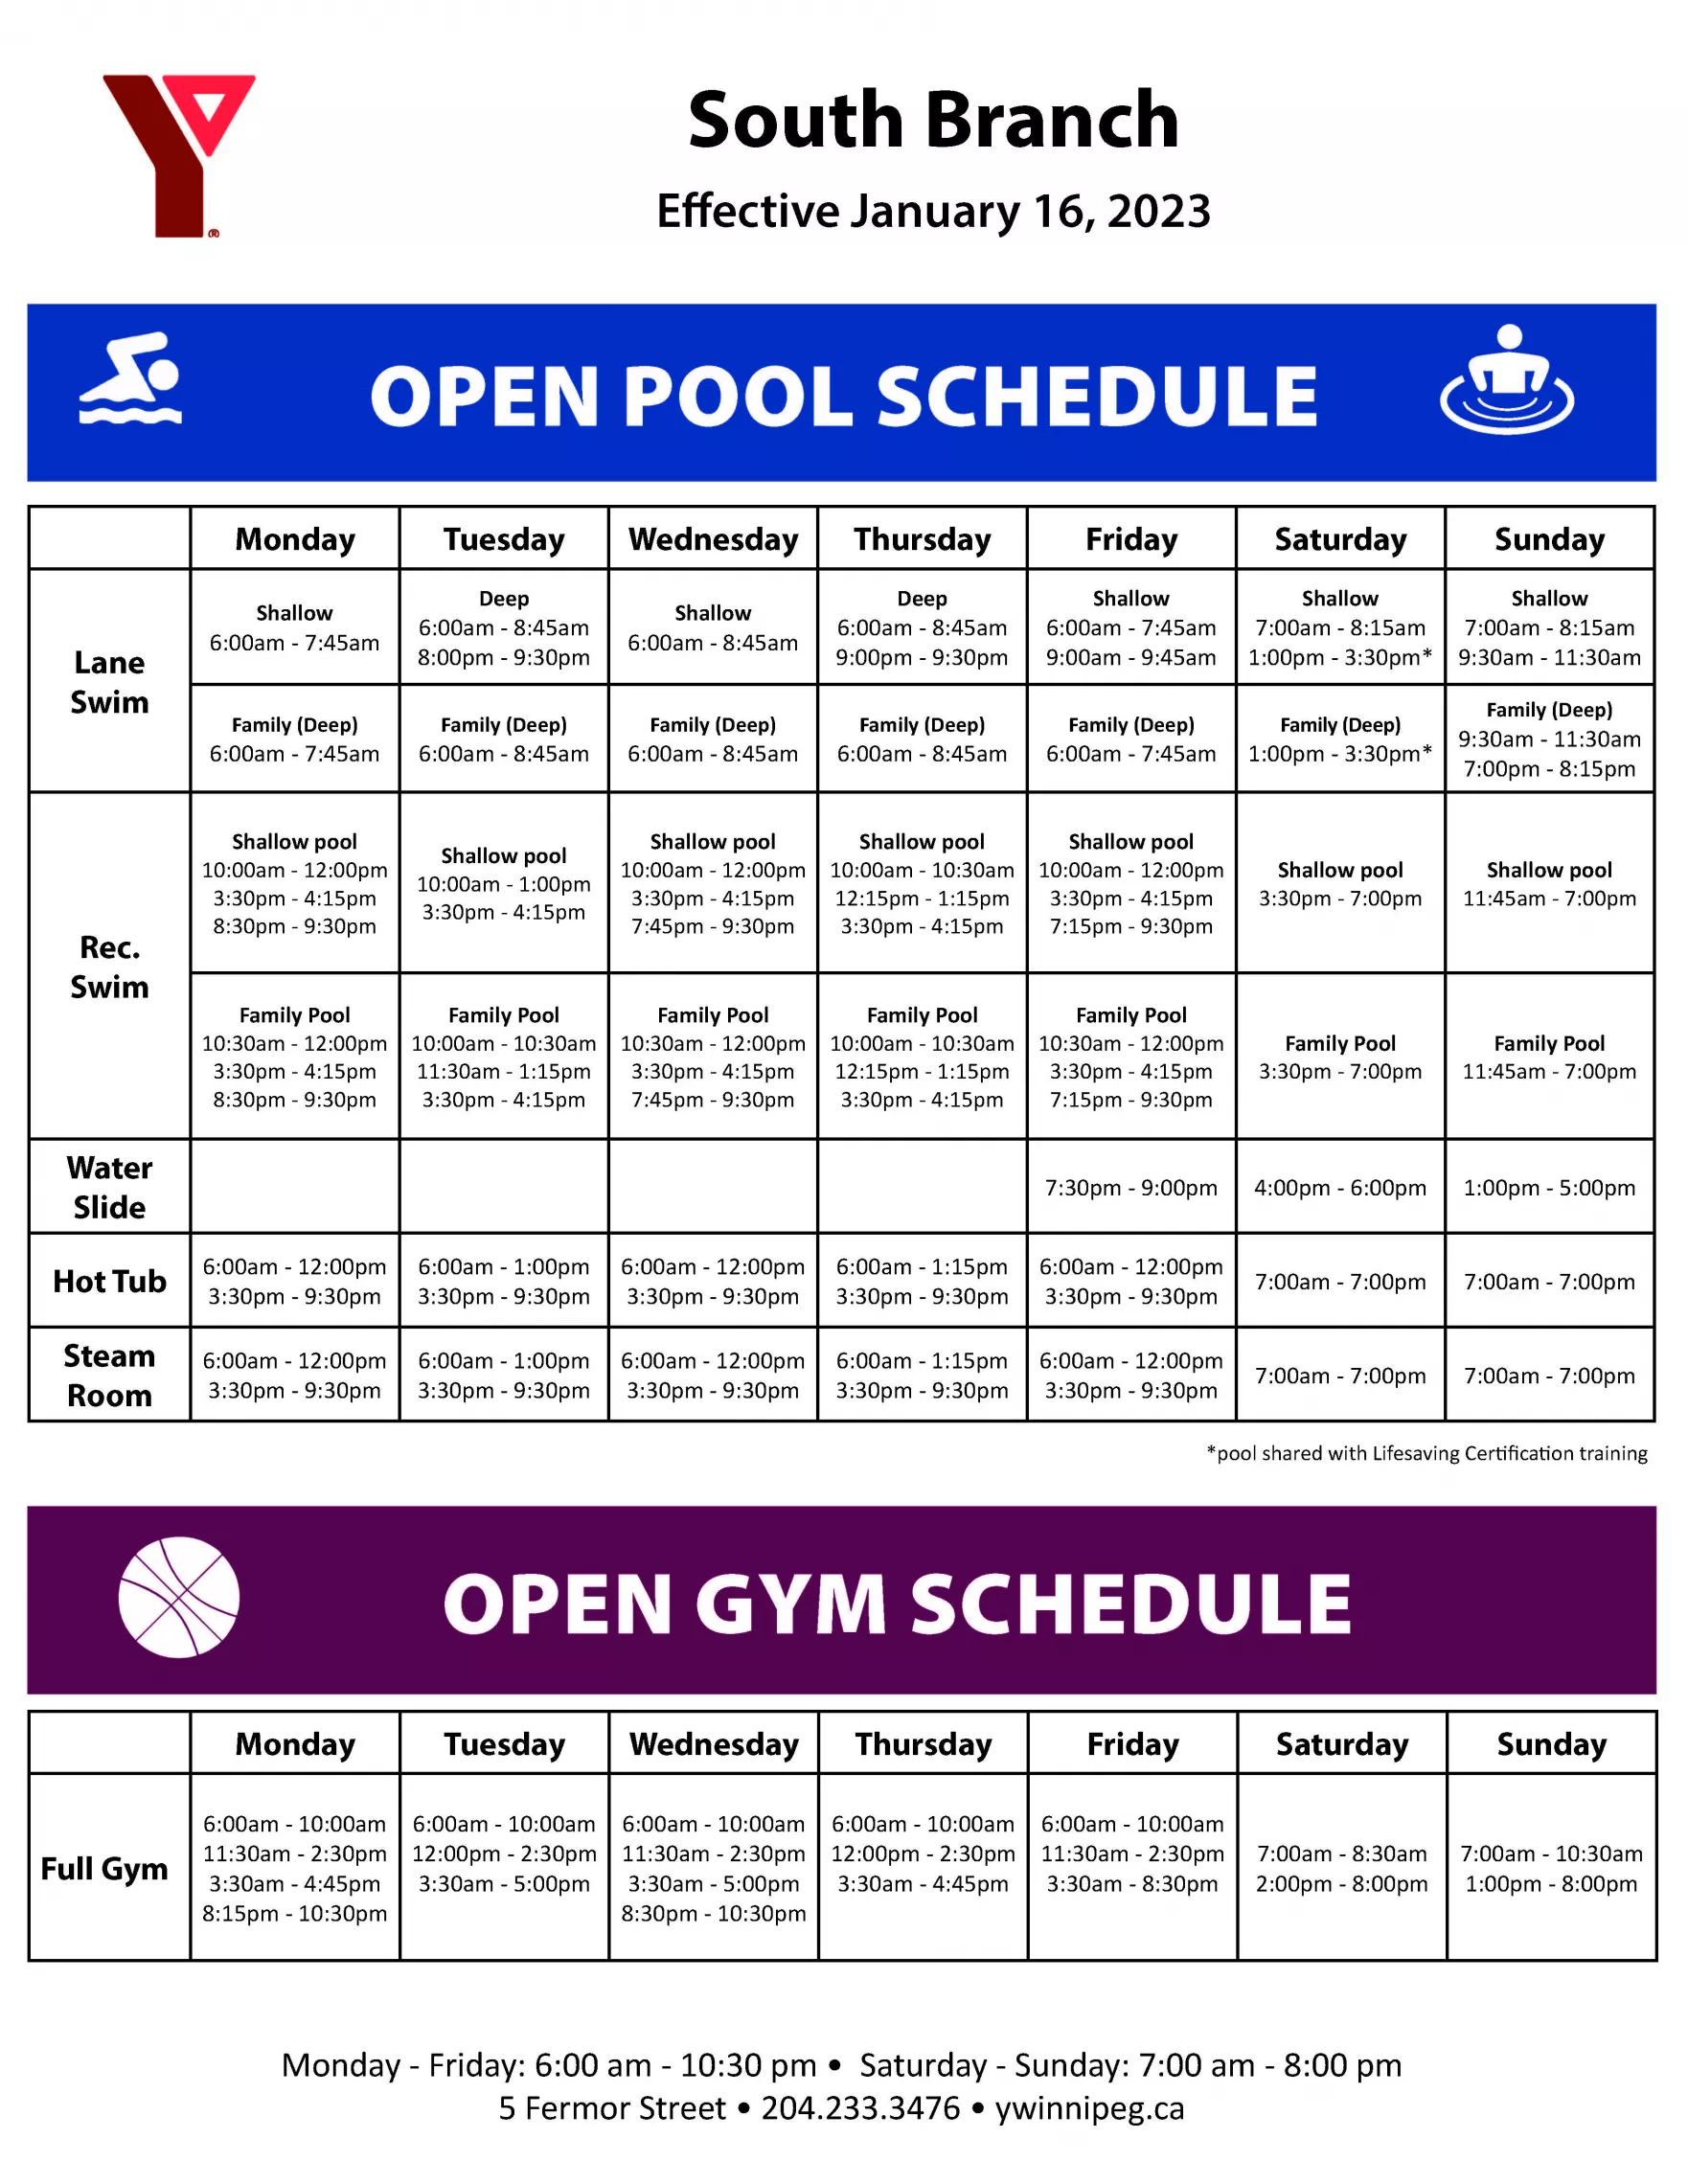 South Branch Open Gym and Pool Schedule